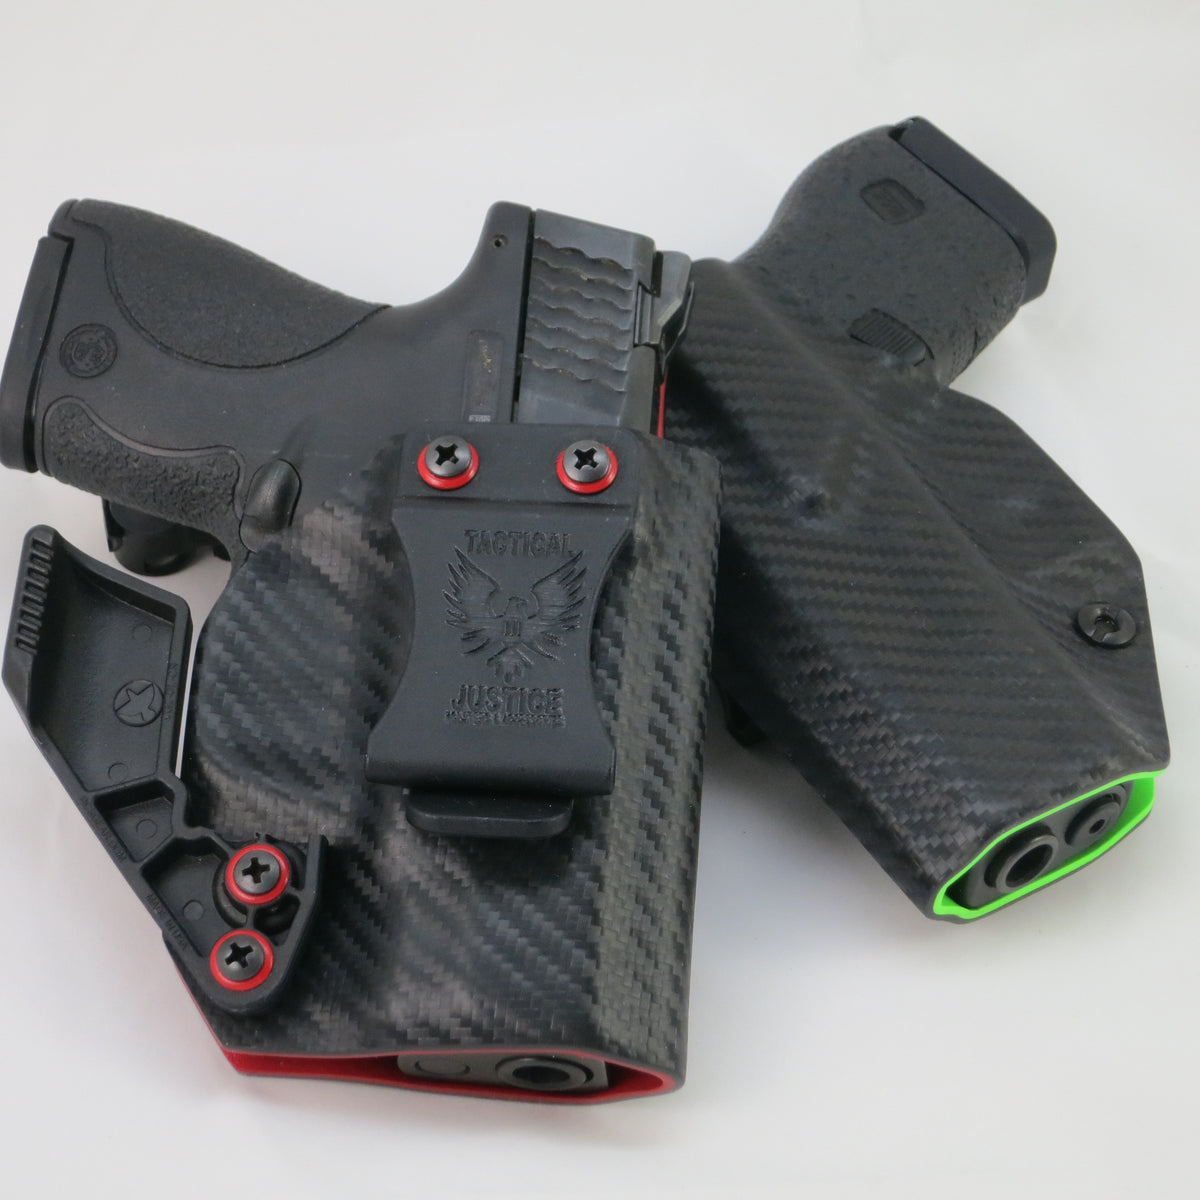 Single Color Tactical Kydex Wallet's – Tactical justice